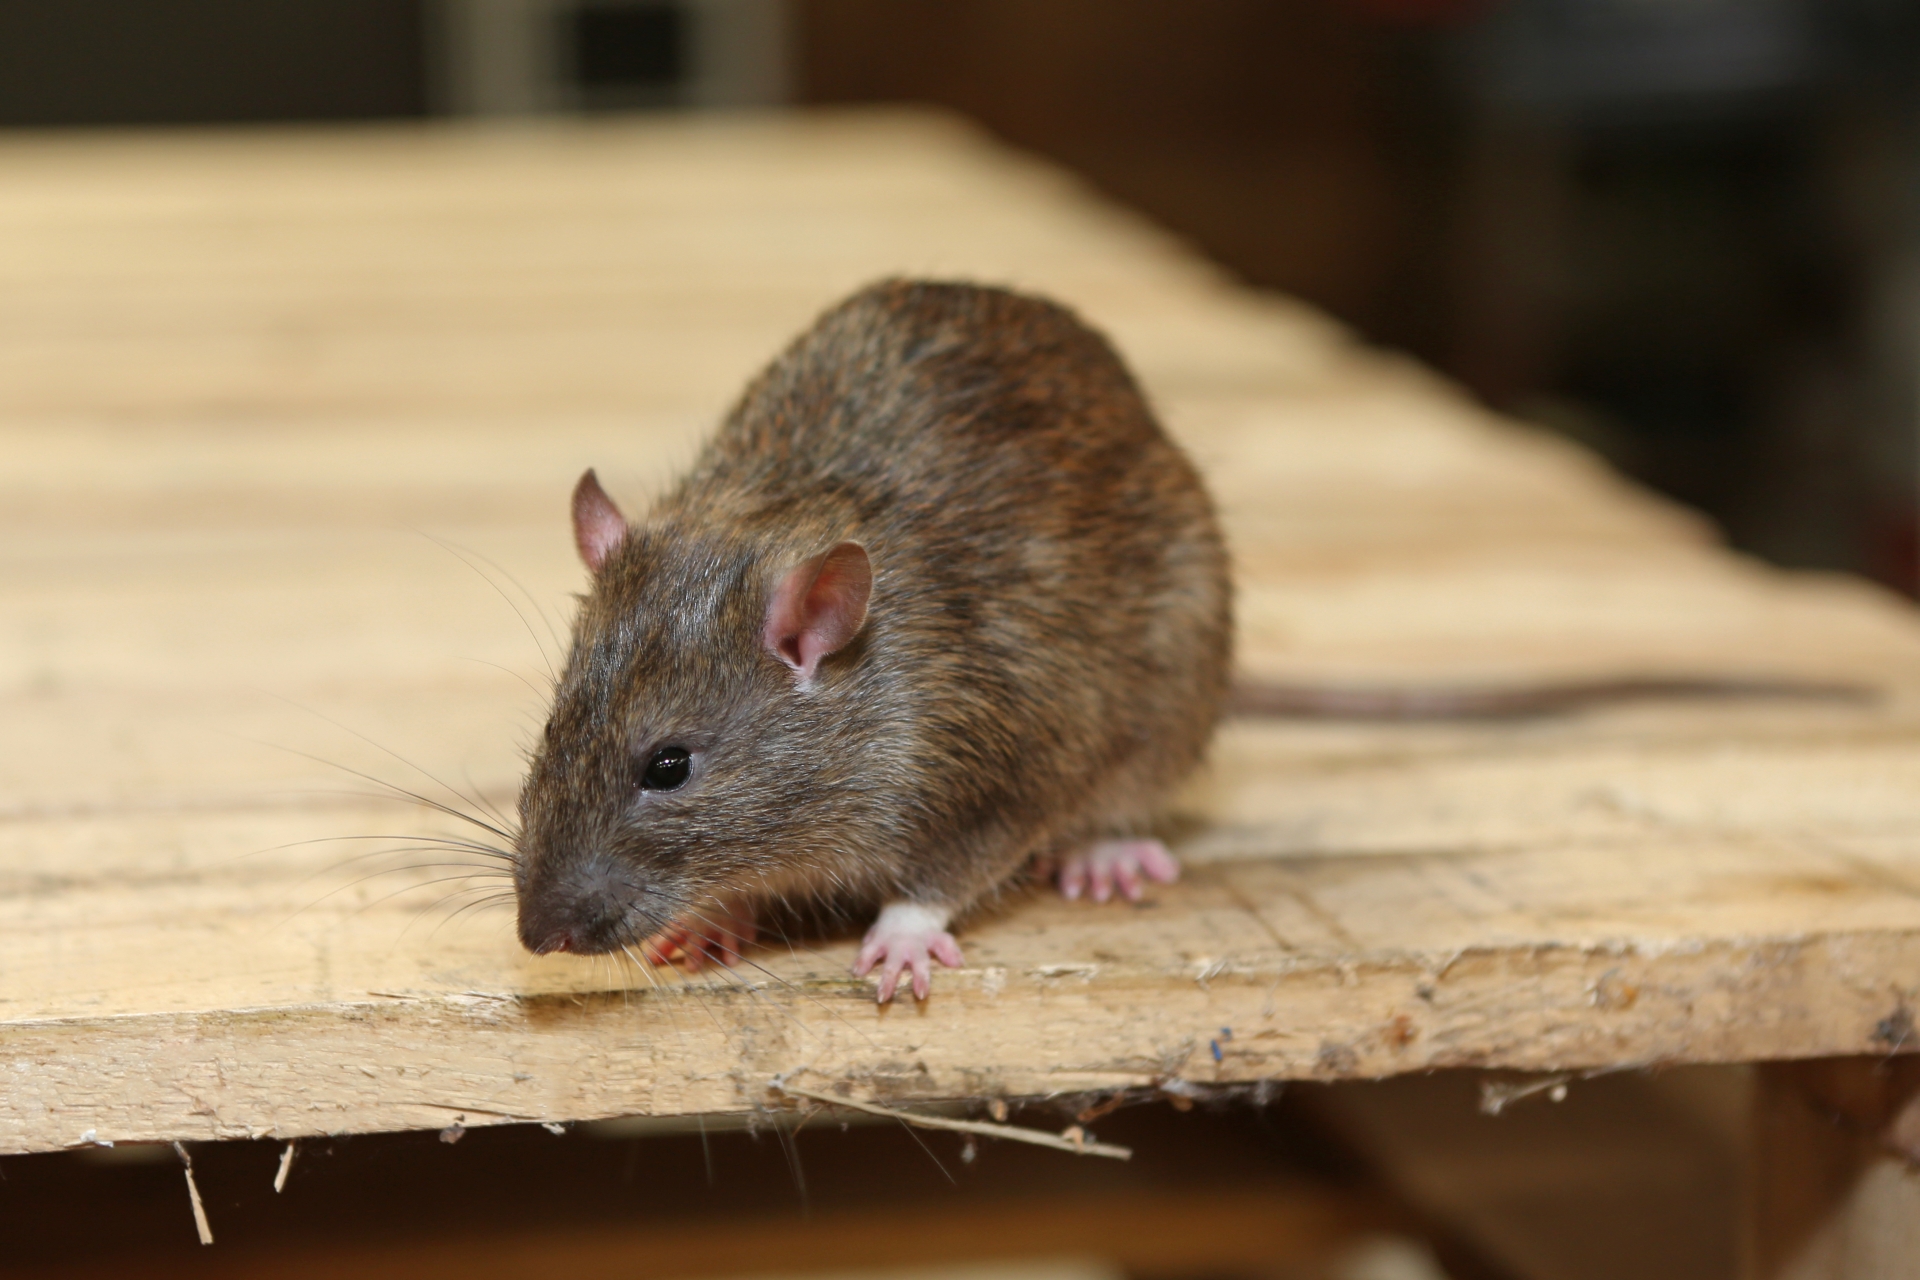 Rat extermination, Pest Control in Walton-on-Thames, Hersham, KT12. Call Now 020 8166 9746